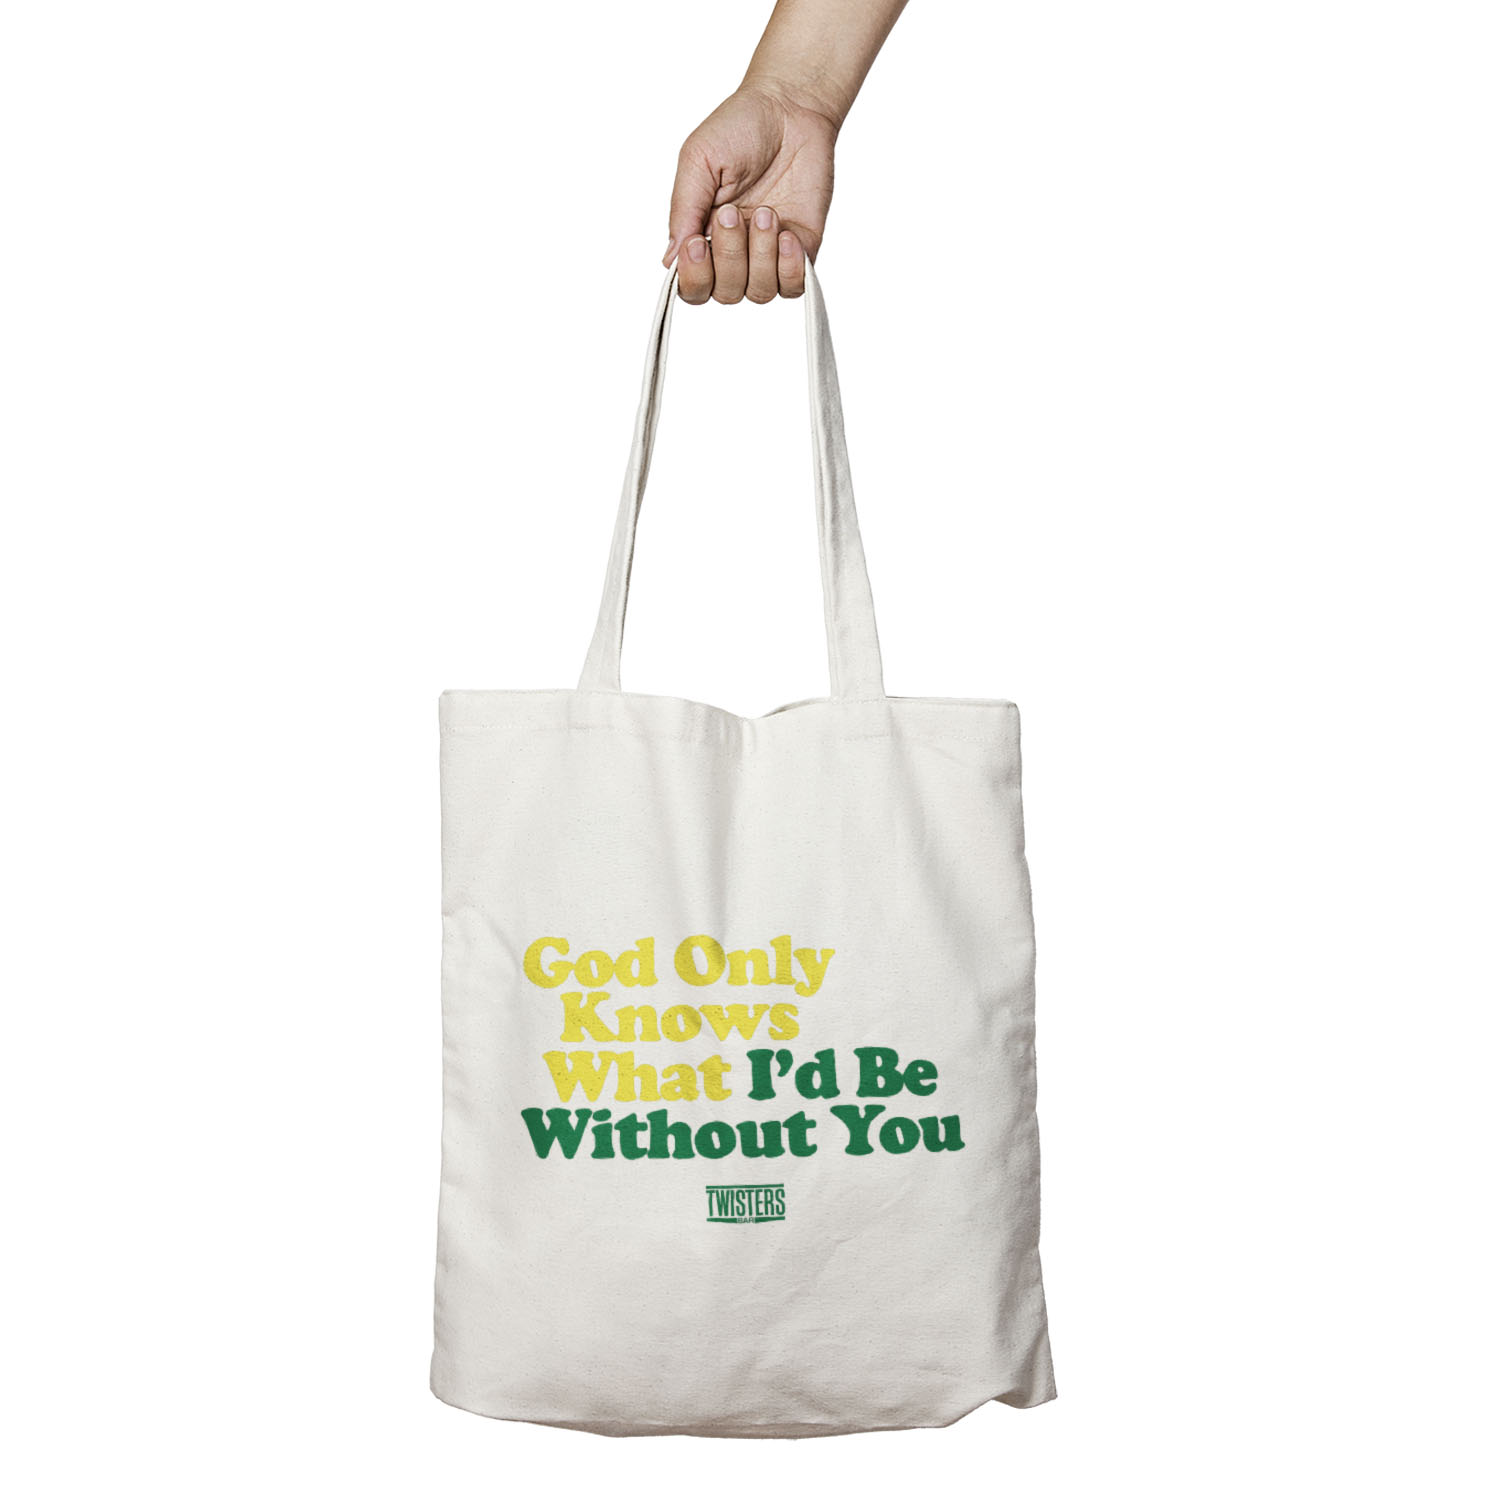 ‘Good Only Knows’ Tote Bag - Twisters Bar Colchester